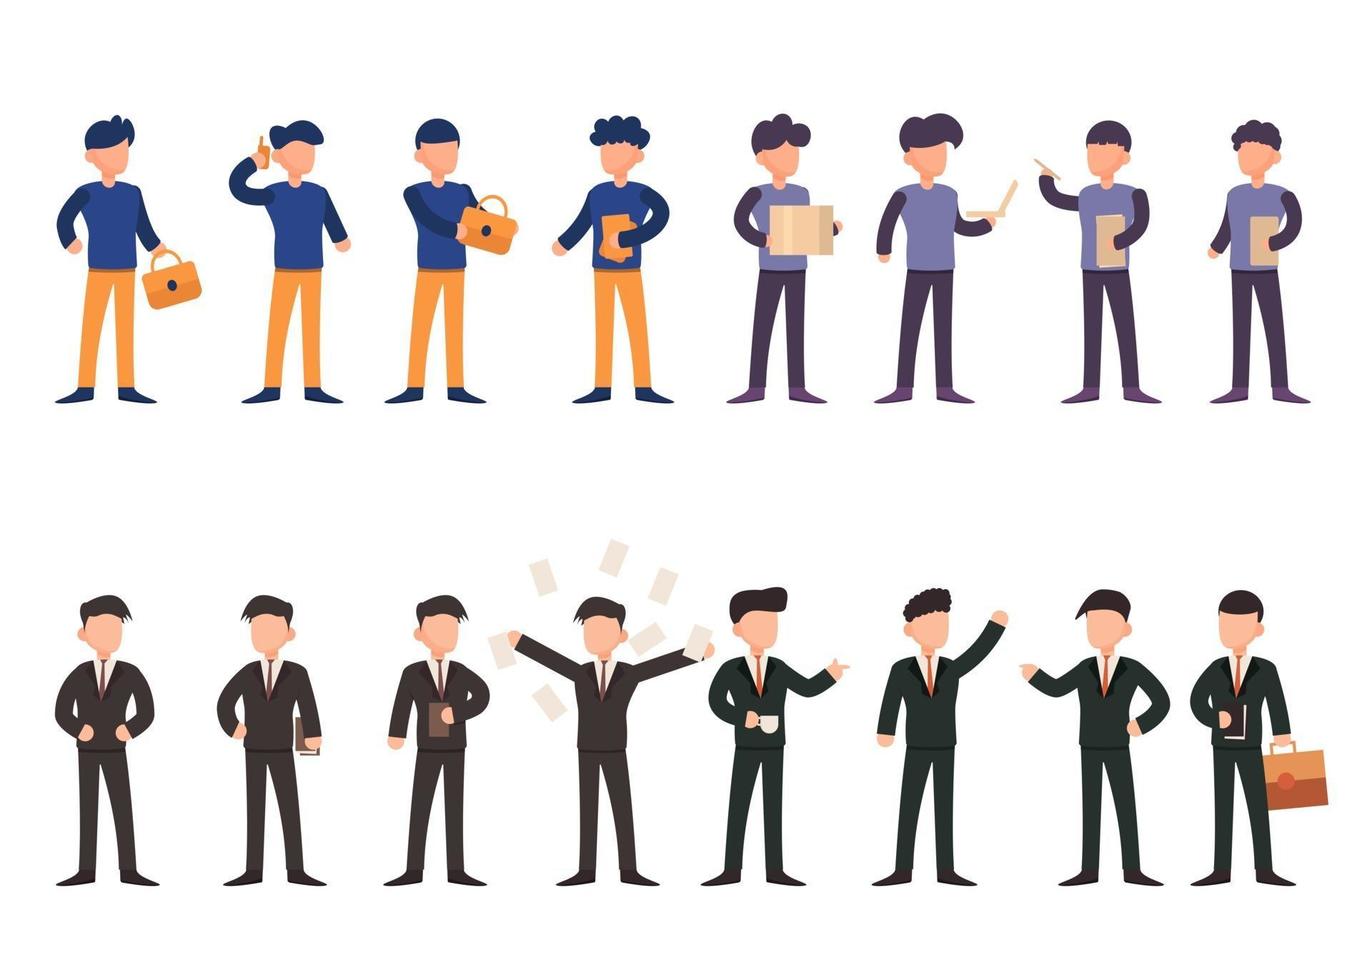 Bundle of many career character 4 sets, 16 poses of various professions, lifestyles, vector